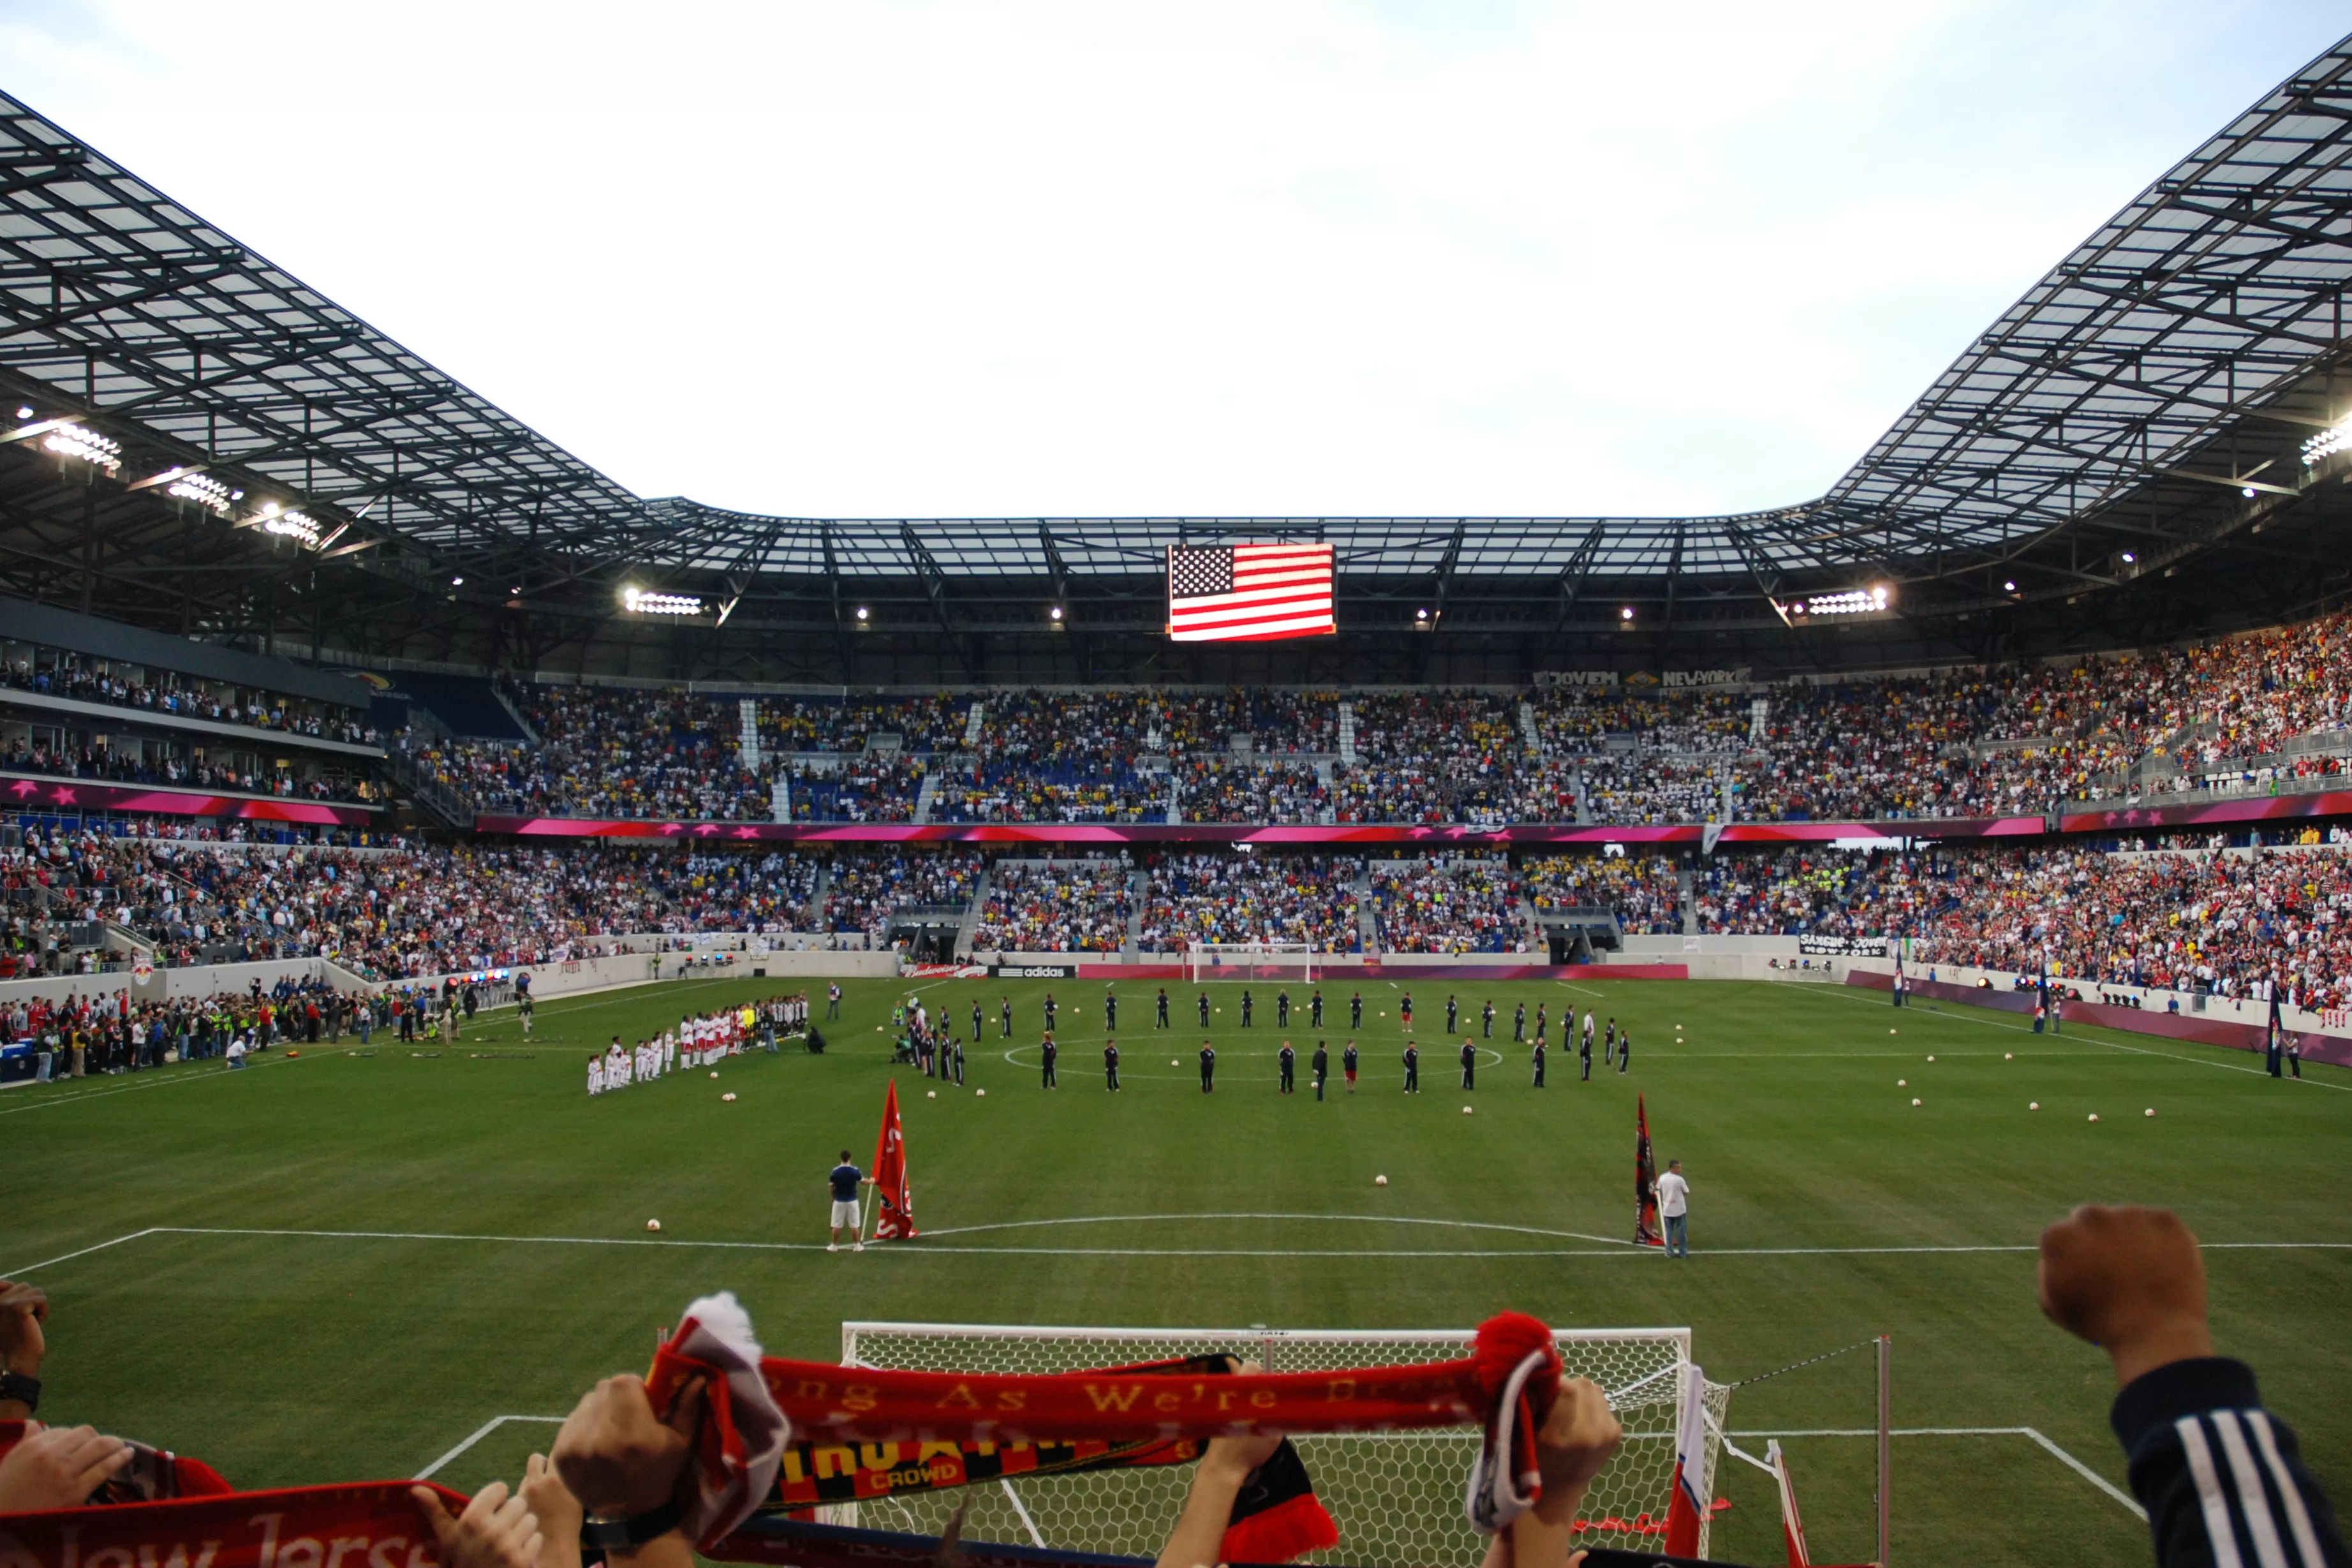 Red Bull Arena in Germany, Europe | Football - Rated 3.9